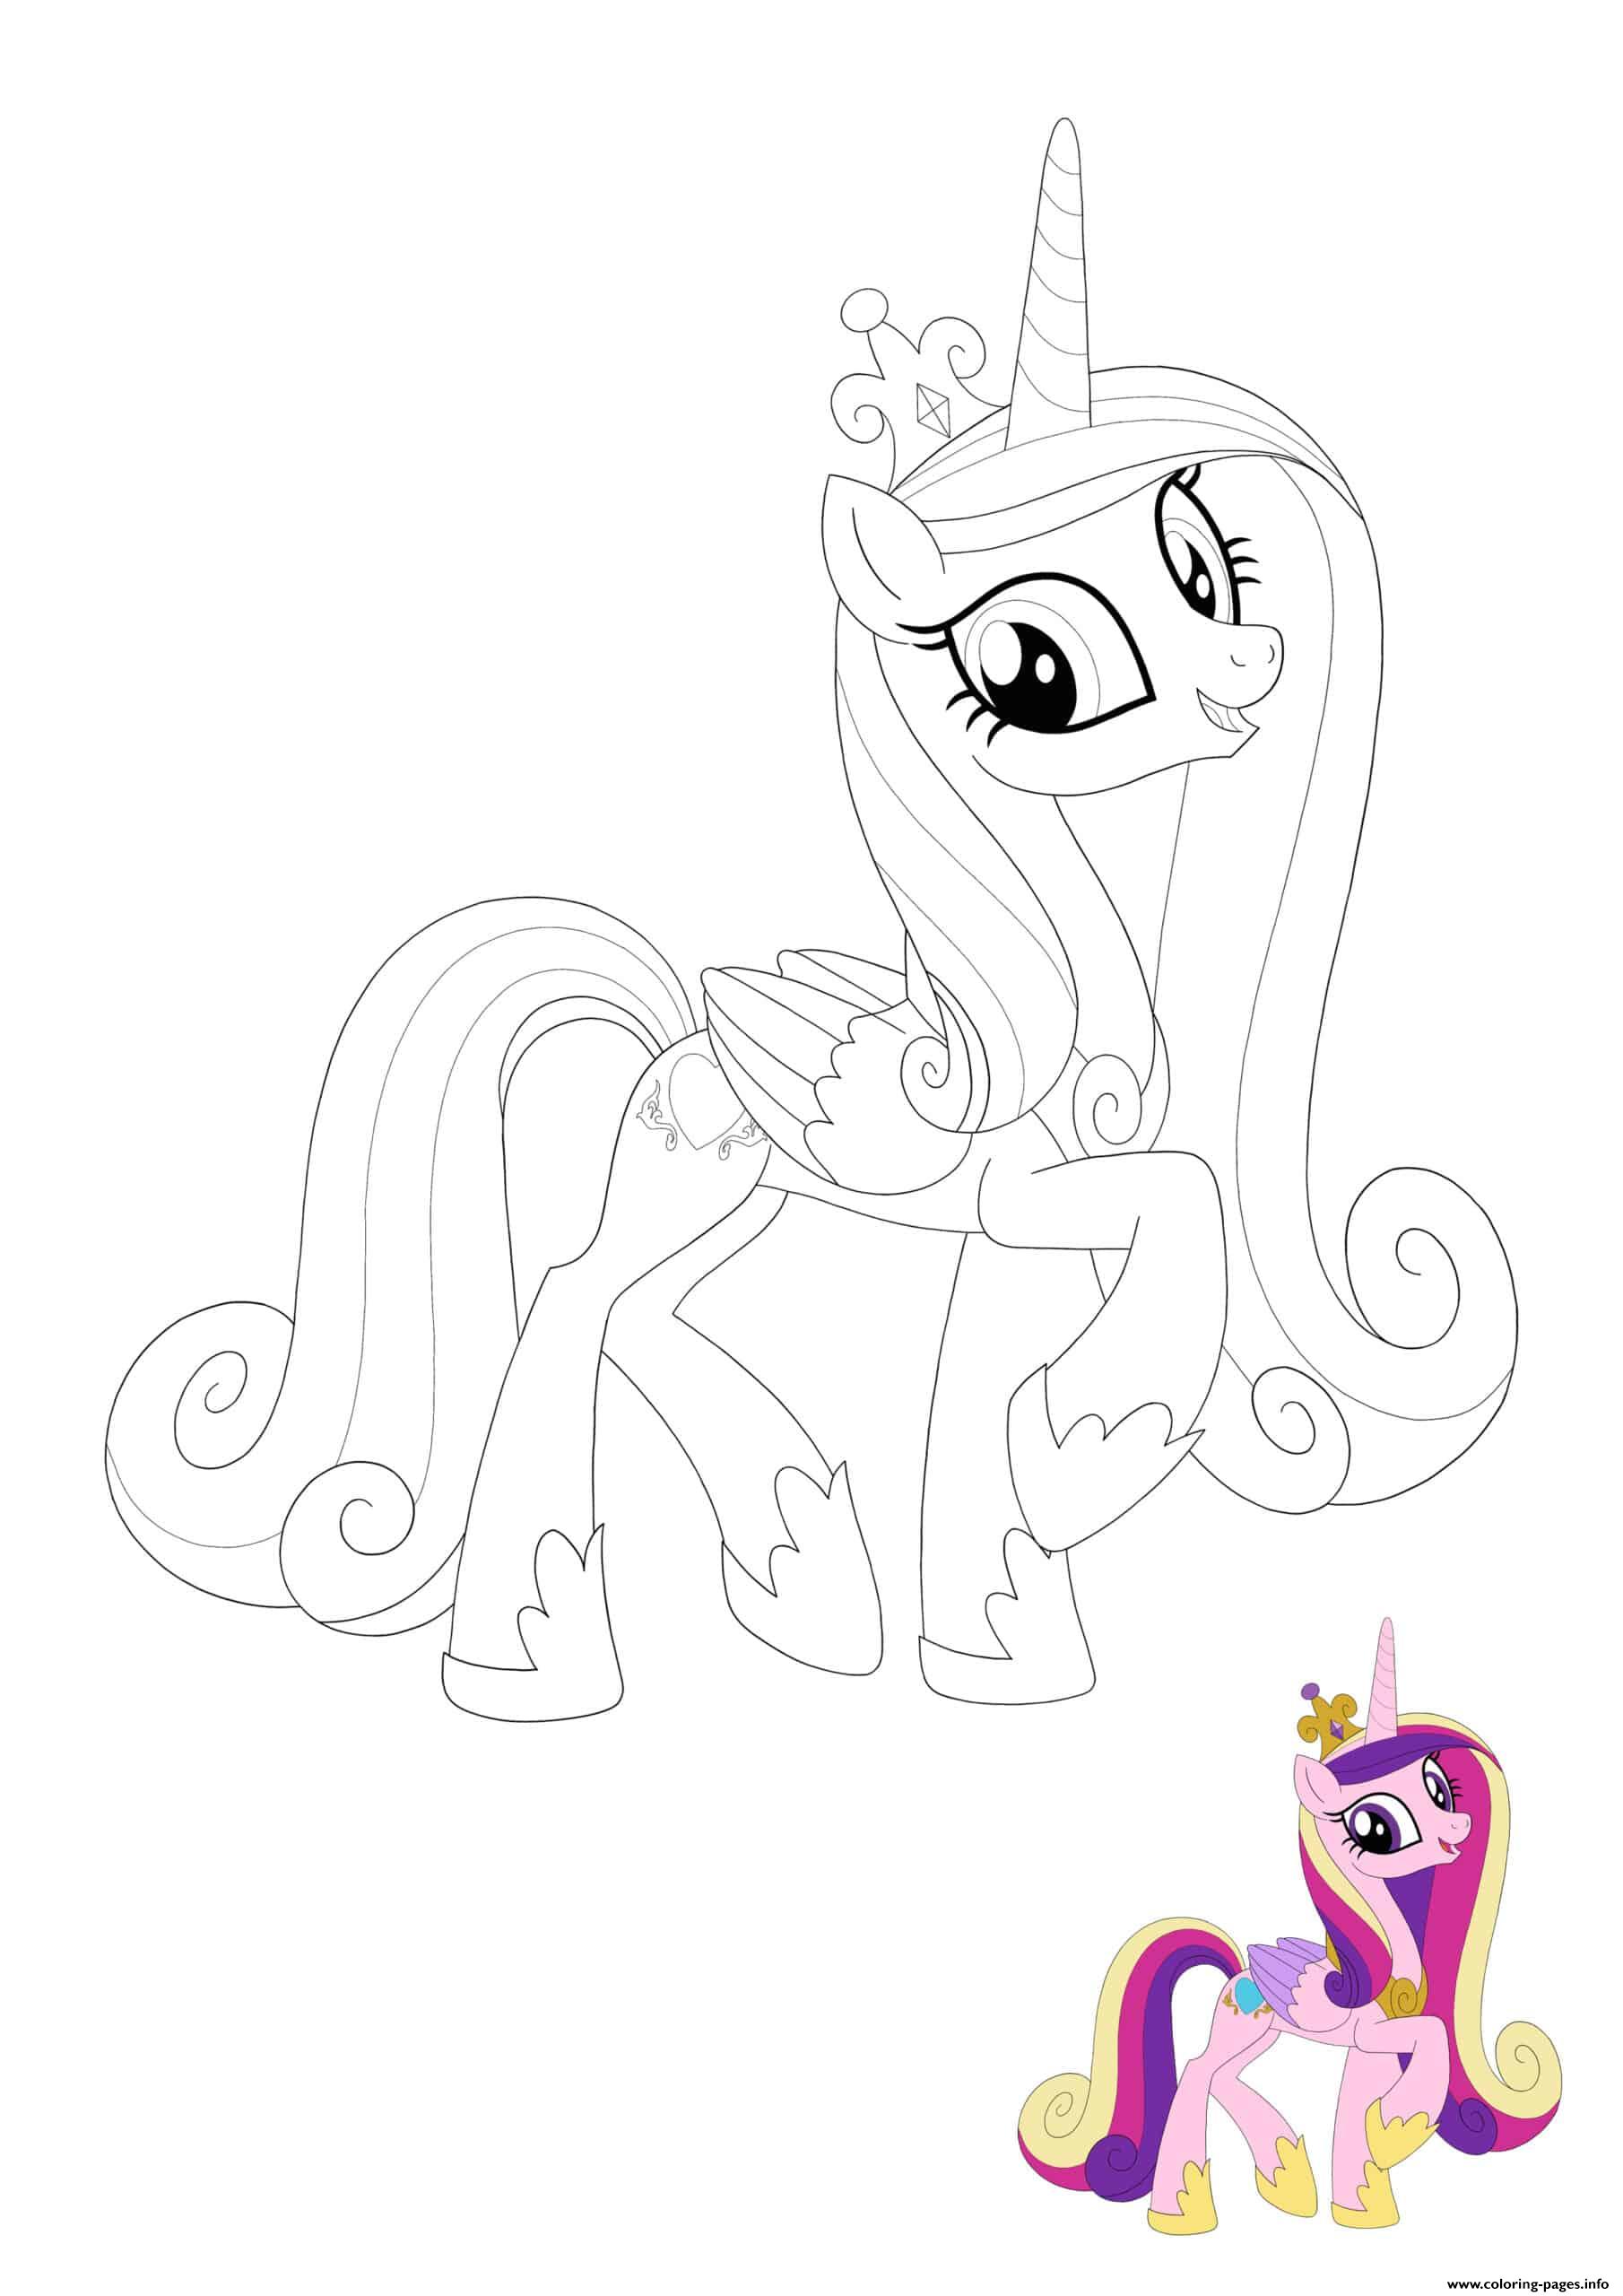 Printable Princess Cadence Coloring Page Thekidsworksheet | Images and ...